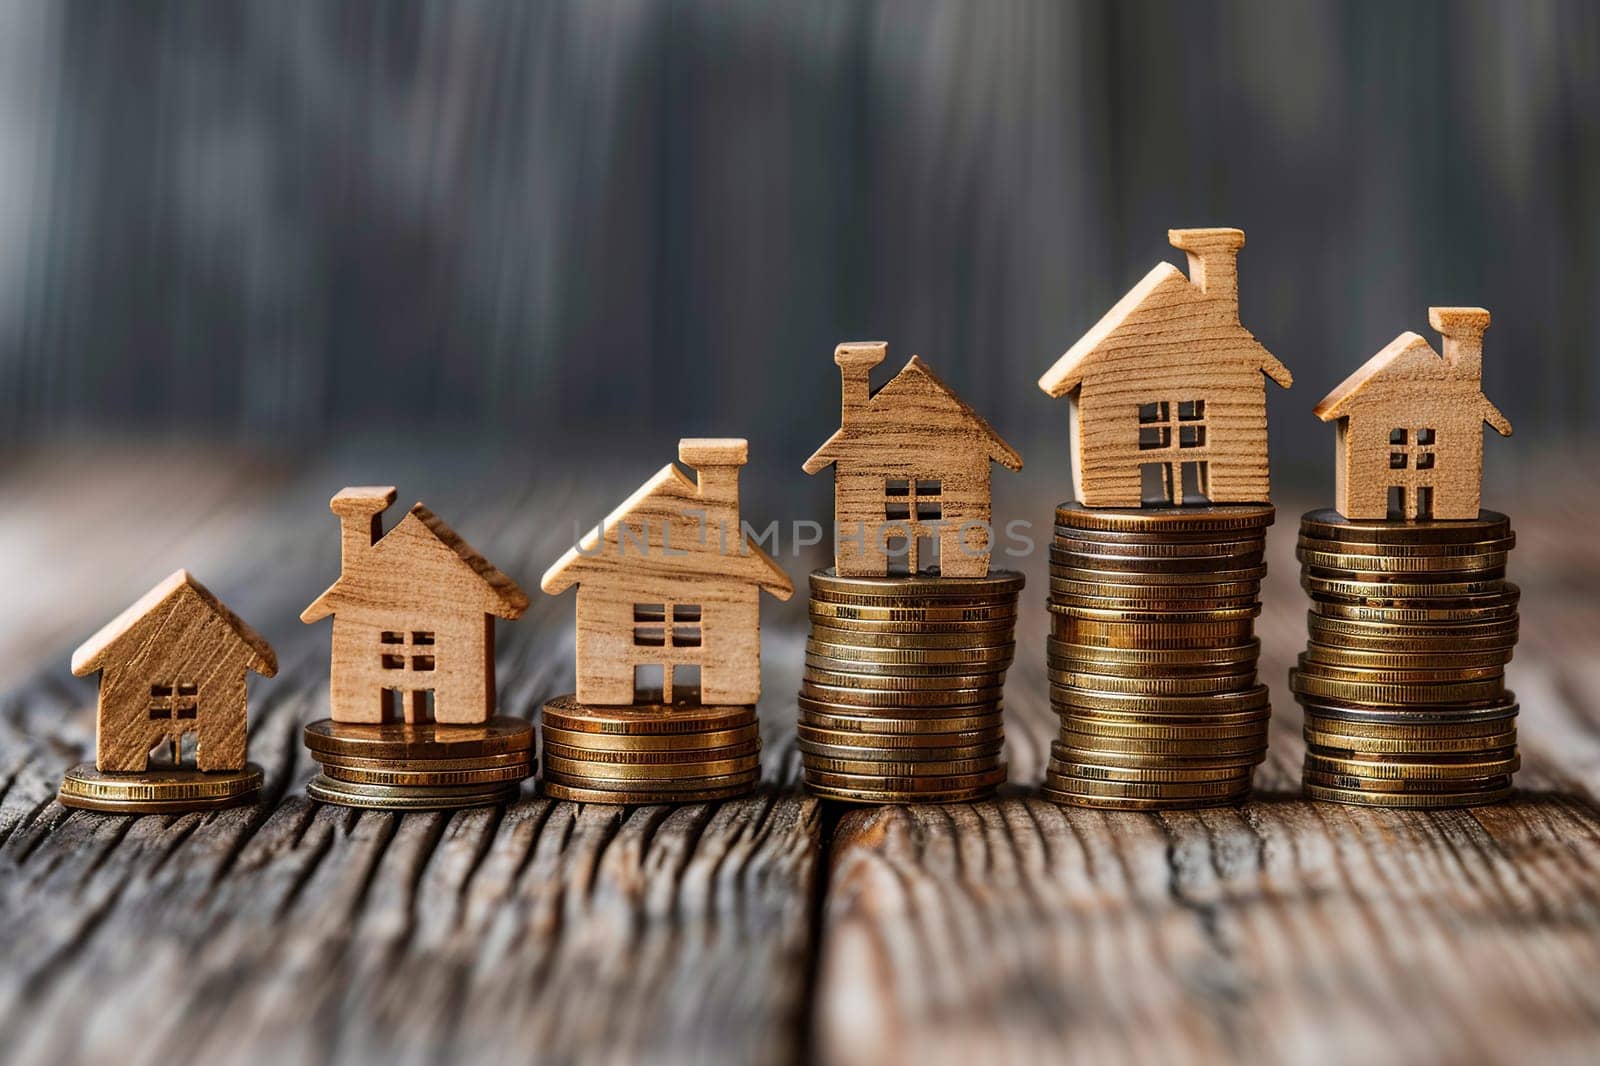 Miniature wooden houses on stacks of gold coins on a wooden surface.